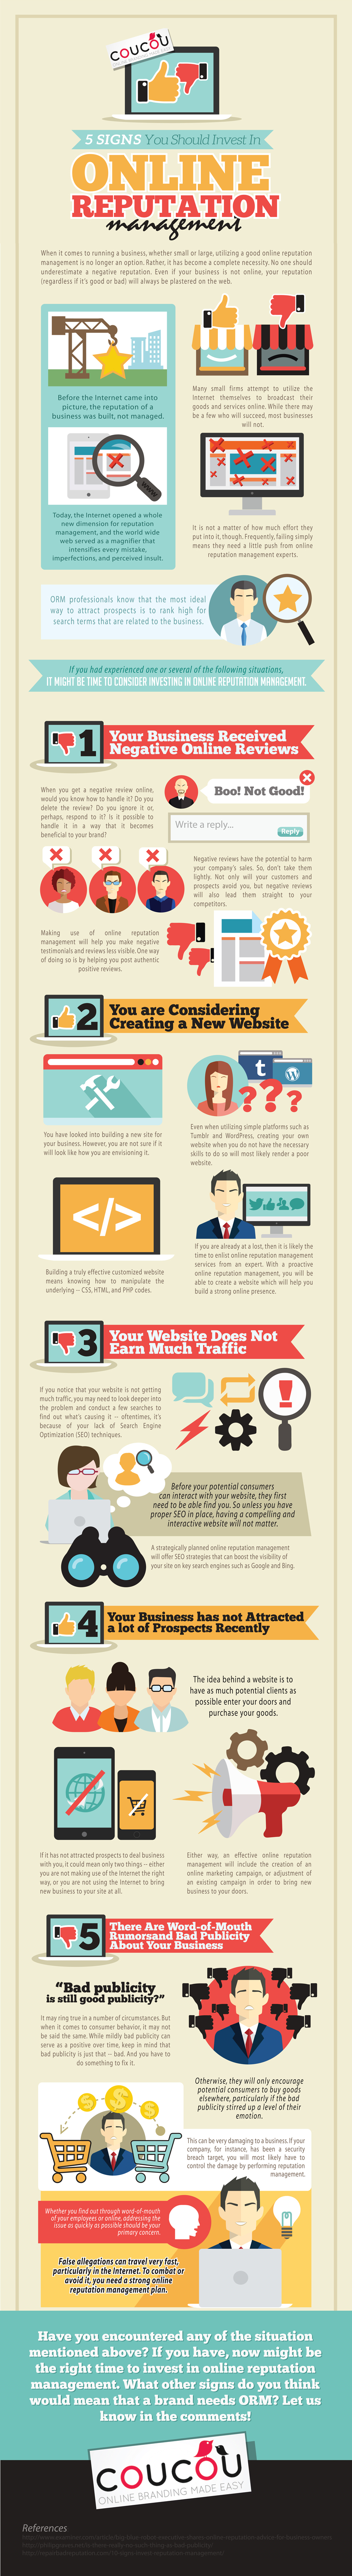 5 Signs You Should Invest In Online Reputation Management (Infographic) - An Infographic from Coucou Marketing